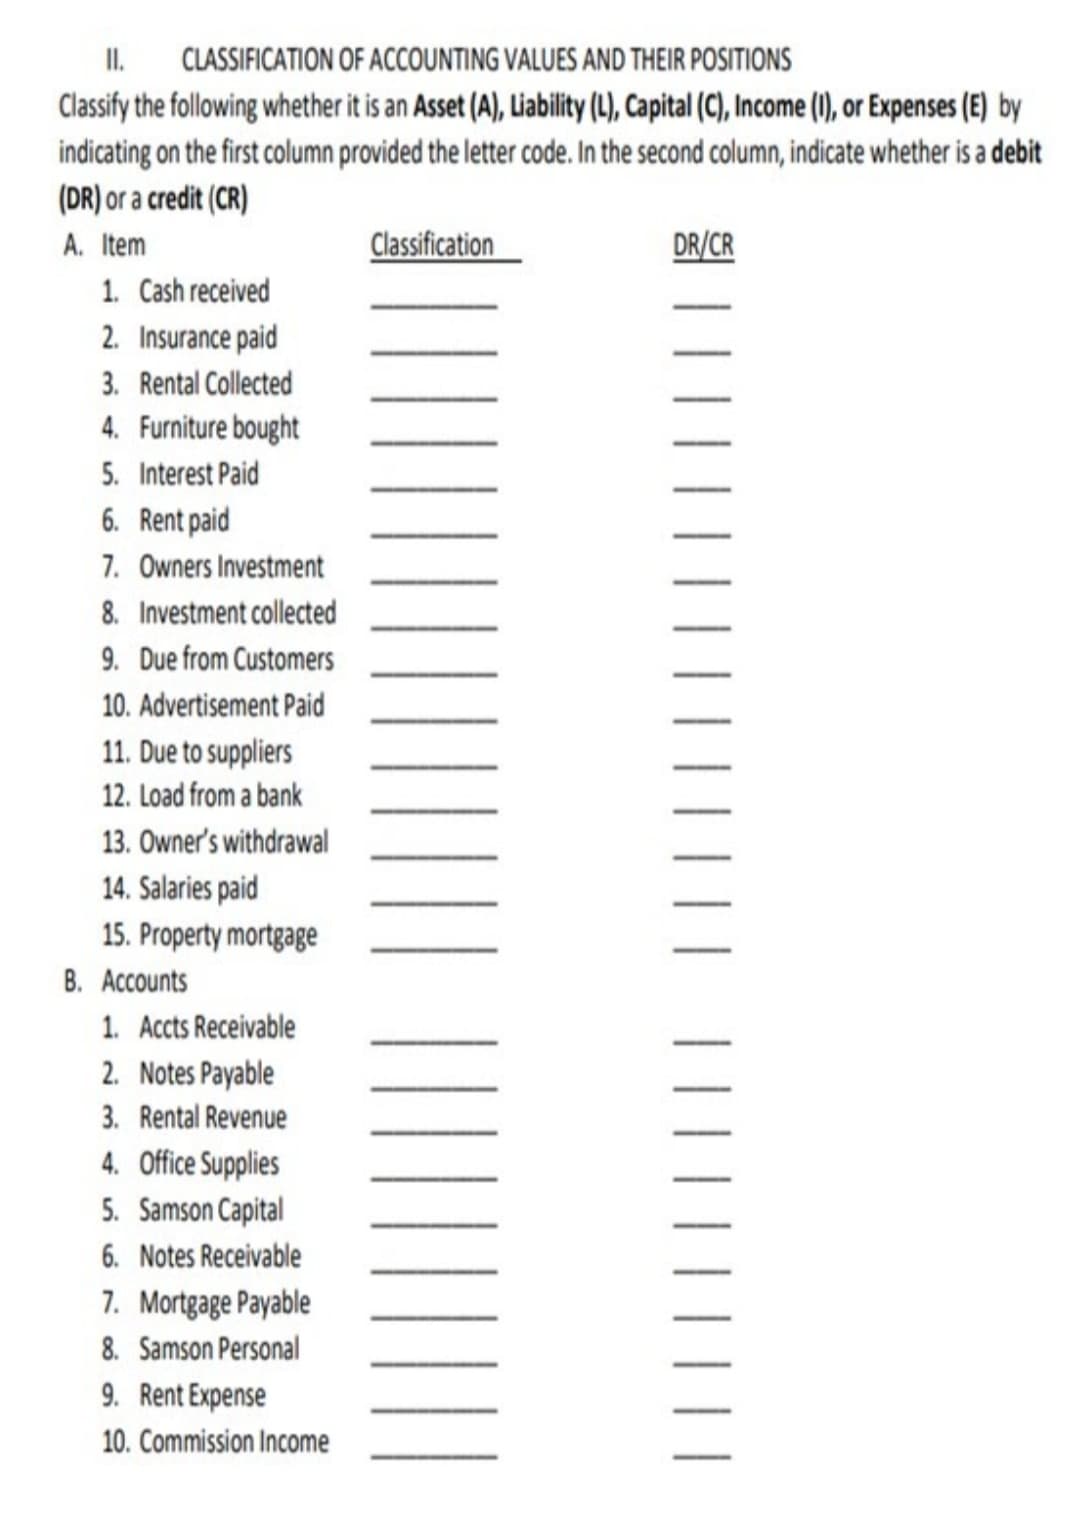 II.
Classify the following whether it is an Asset (A), Liability (4), Capital (C), Income (), or Expenses (E) by
indicating on the first column provided the letter code. In the second column, indicate whether is a debit
(DR) or a credit (CR)
CLASSIFICATION OF ACCOUNTING VALUES AND THEIR POSITIONS
A. Item
Classification
DR/CR
1. Cash received
2. Insurance paid
3. Rental Collected
4. Furniture bought
5. Interest Paid
6. Rent paid
7. Owners Investment
8. Investment collected
9. Due from Customers
10. Advertisement Paid
11. Due to suppliers
12. Load from a bank
13. Owner's withdrawal
14. Salaries paid
15. Property mortgage
B. Accounts
1. Accts Receivable
2. Notes Payable
3. Rental Revenue
4. Office Supplies
5. Samson Capital
6. Notes Receivable
7. Mortgage Payable
8. Samson Personal
9. Rent Expense
10. Commission Income
| |
